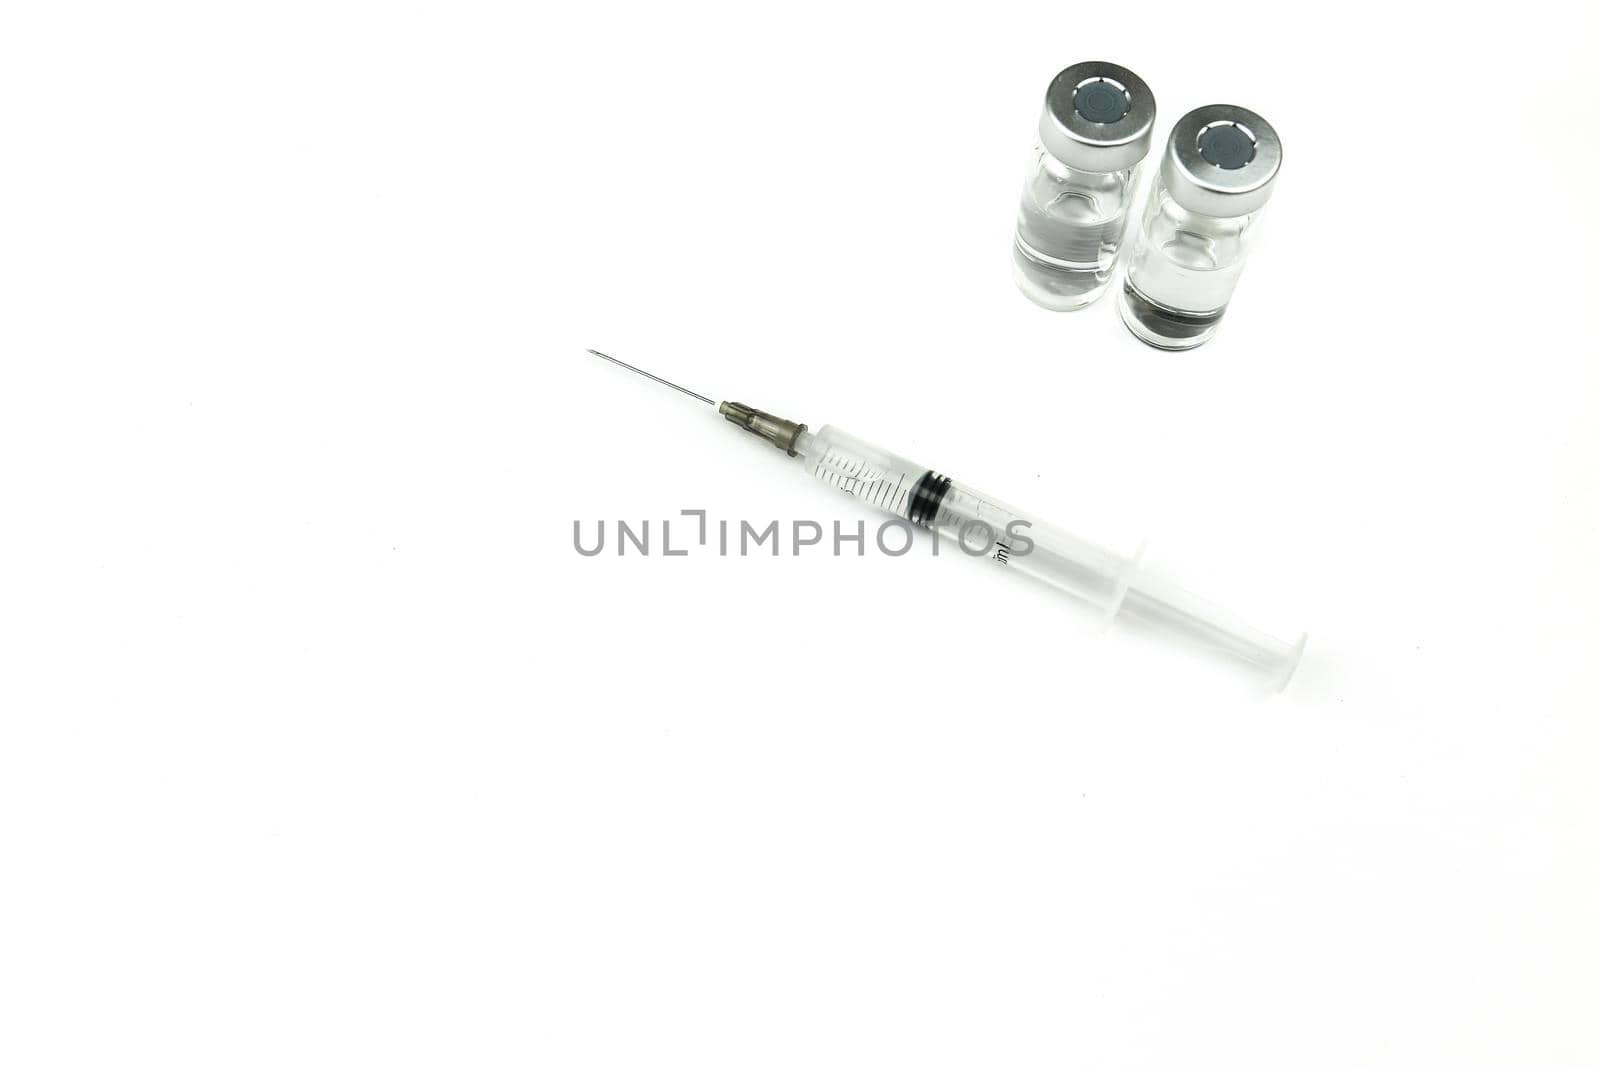 Vials and syringe filled with medicine by soniabonet